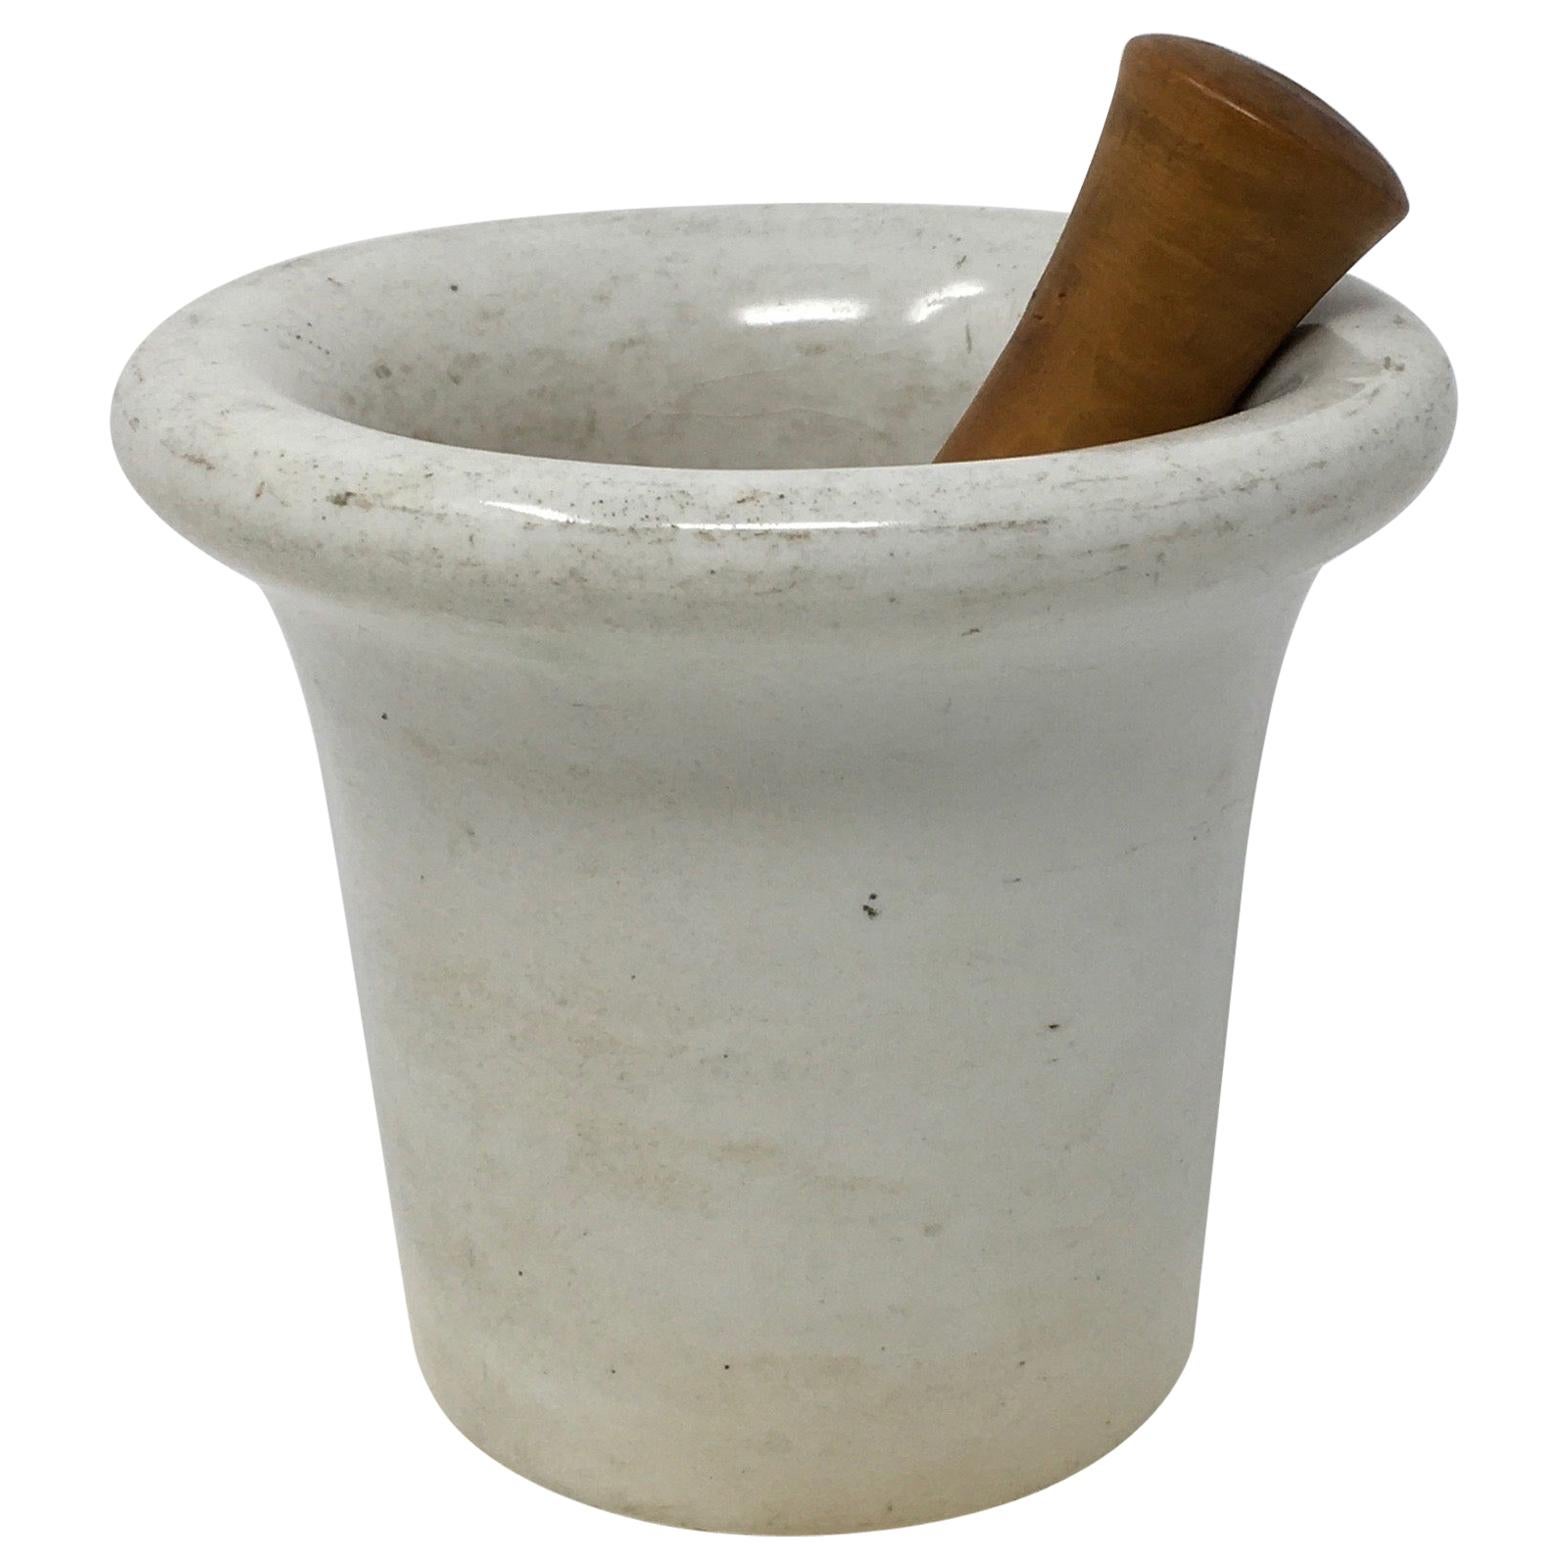 Porcelain Mortar and Pestle from France